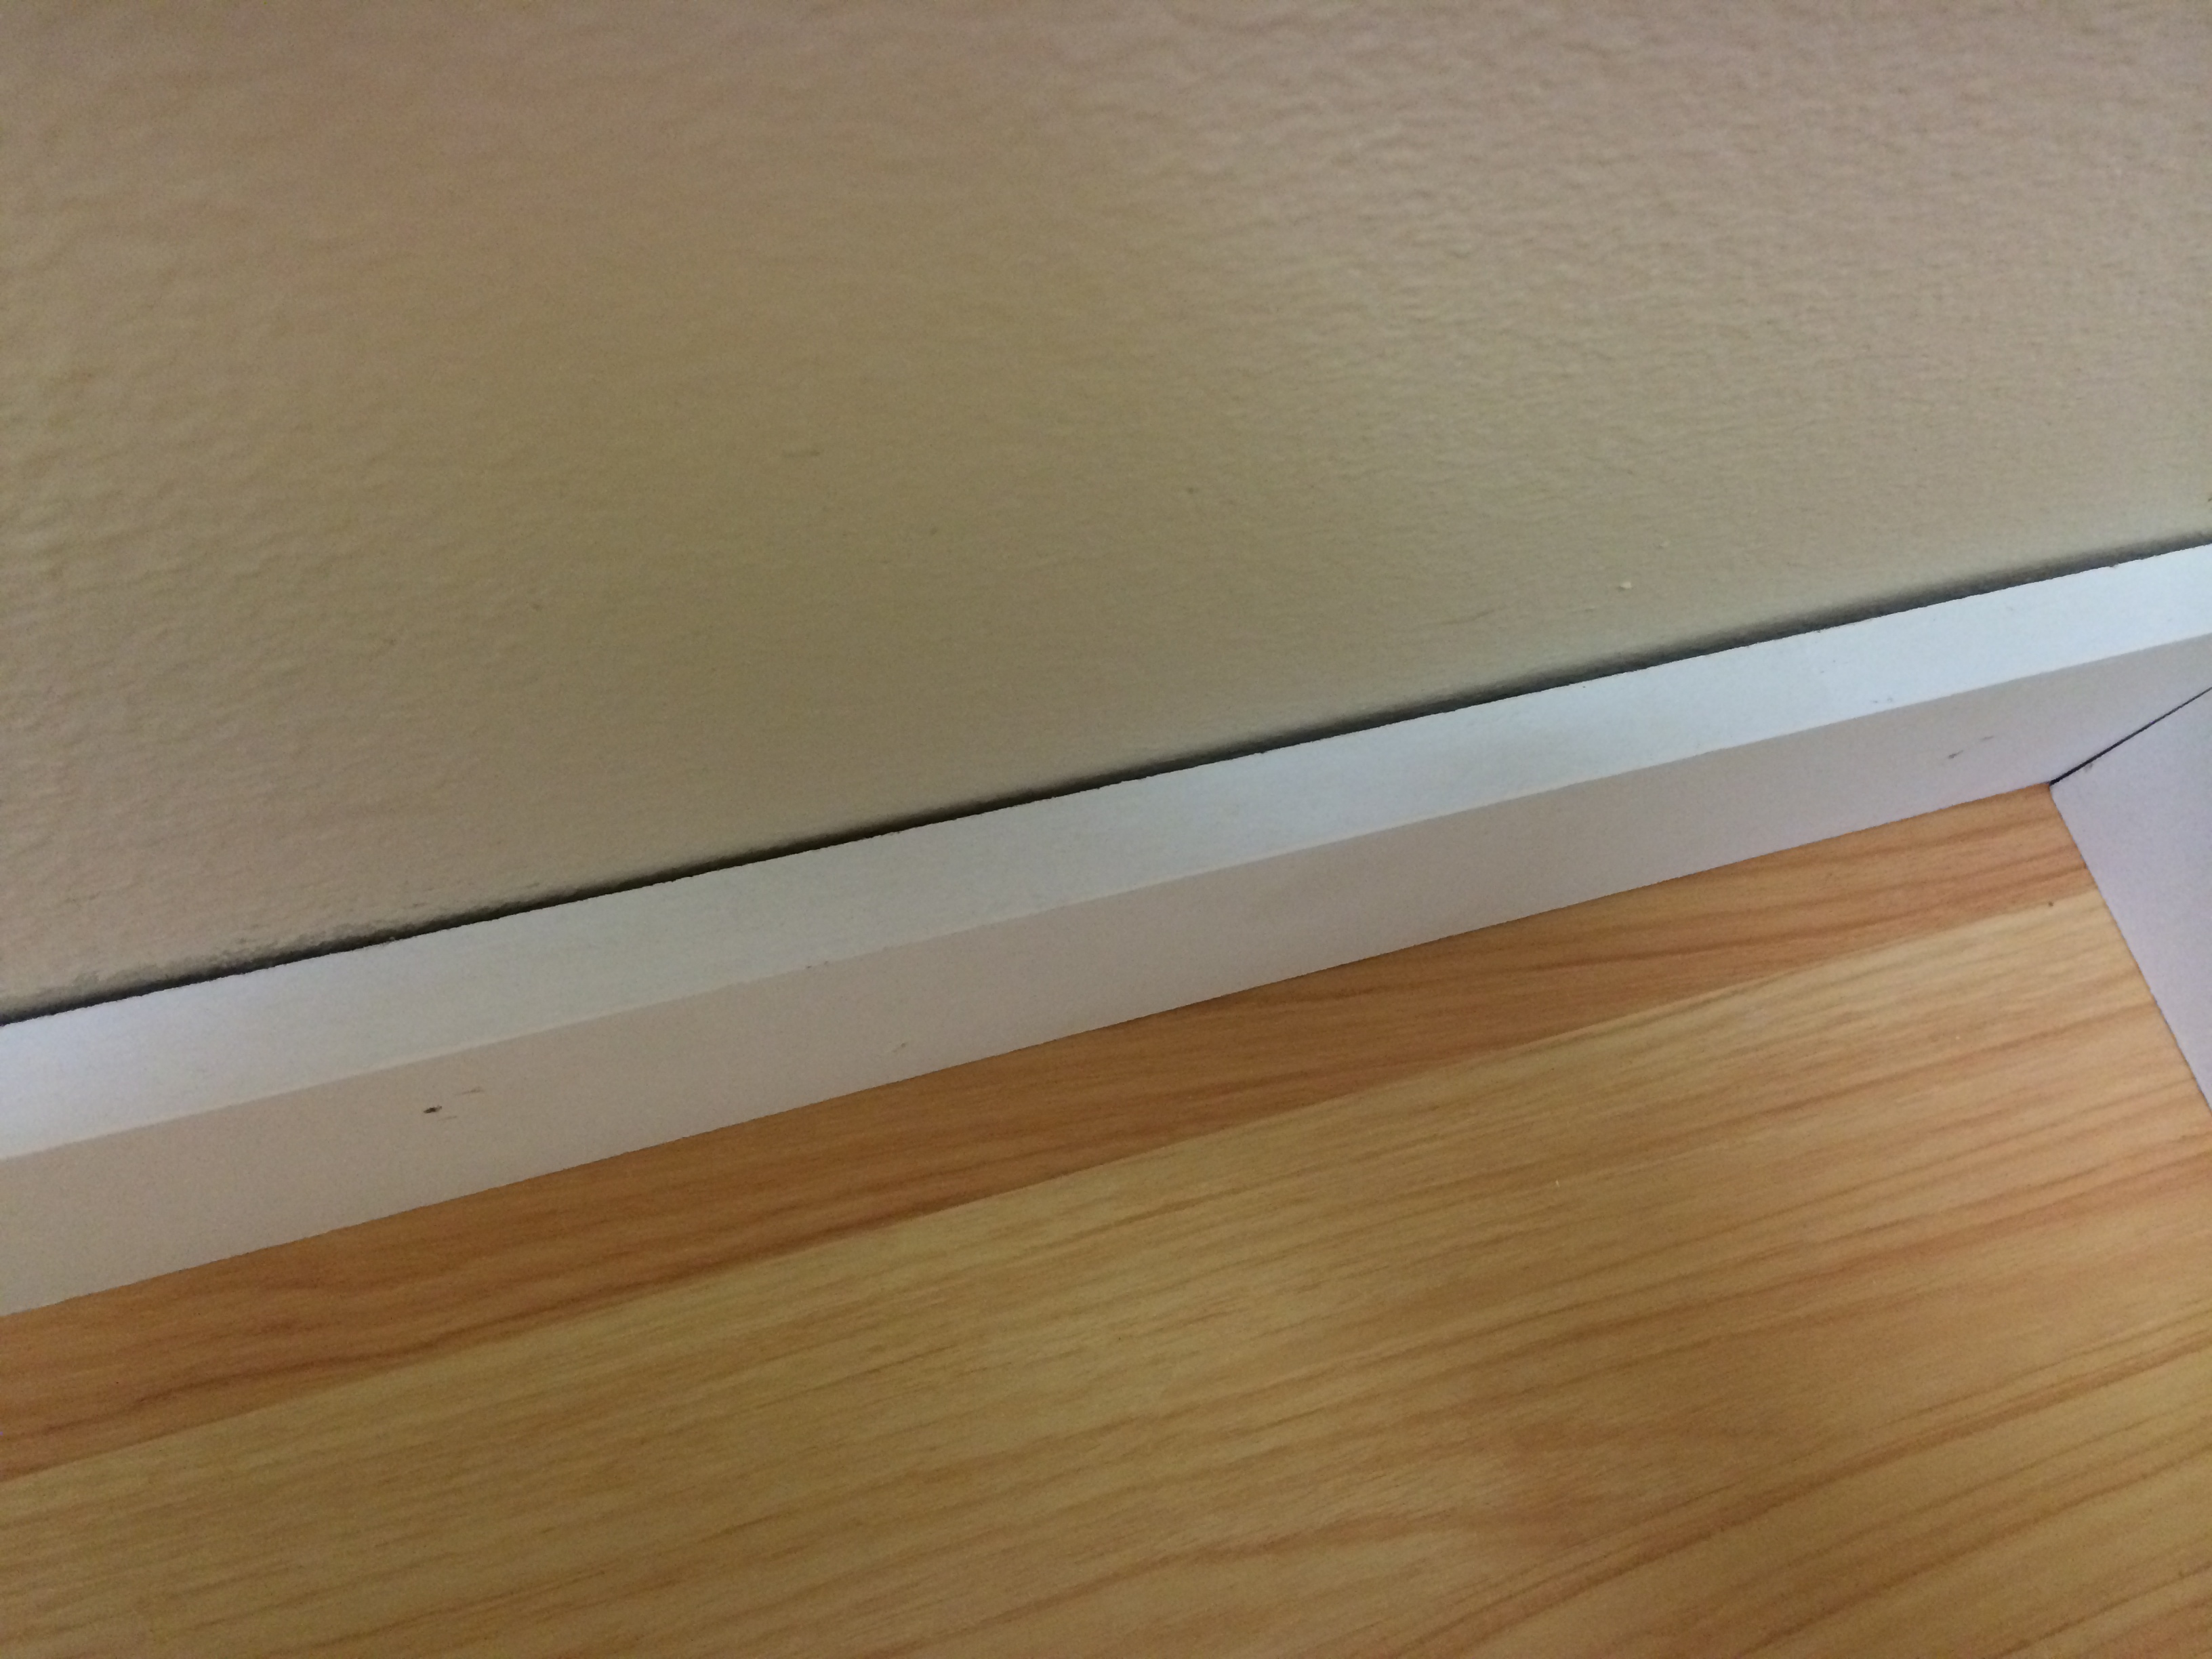 Gap between wall and baseboard by Norman Fitoria